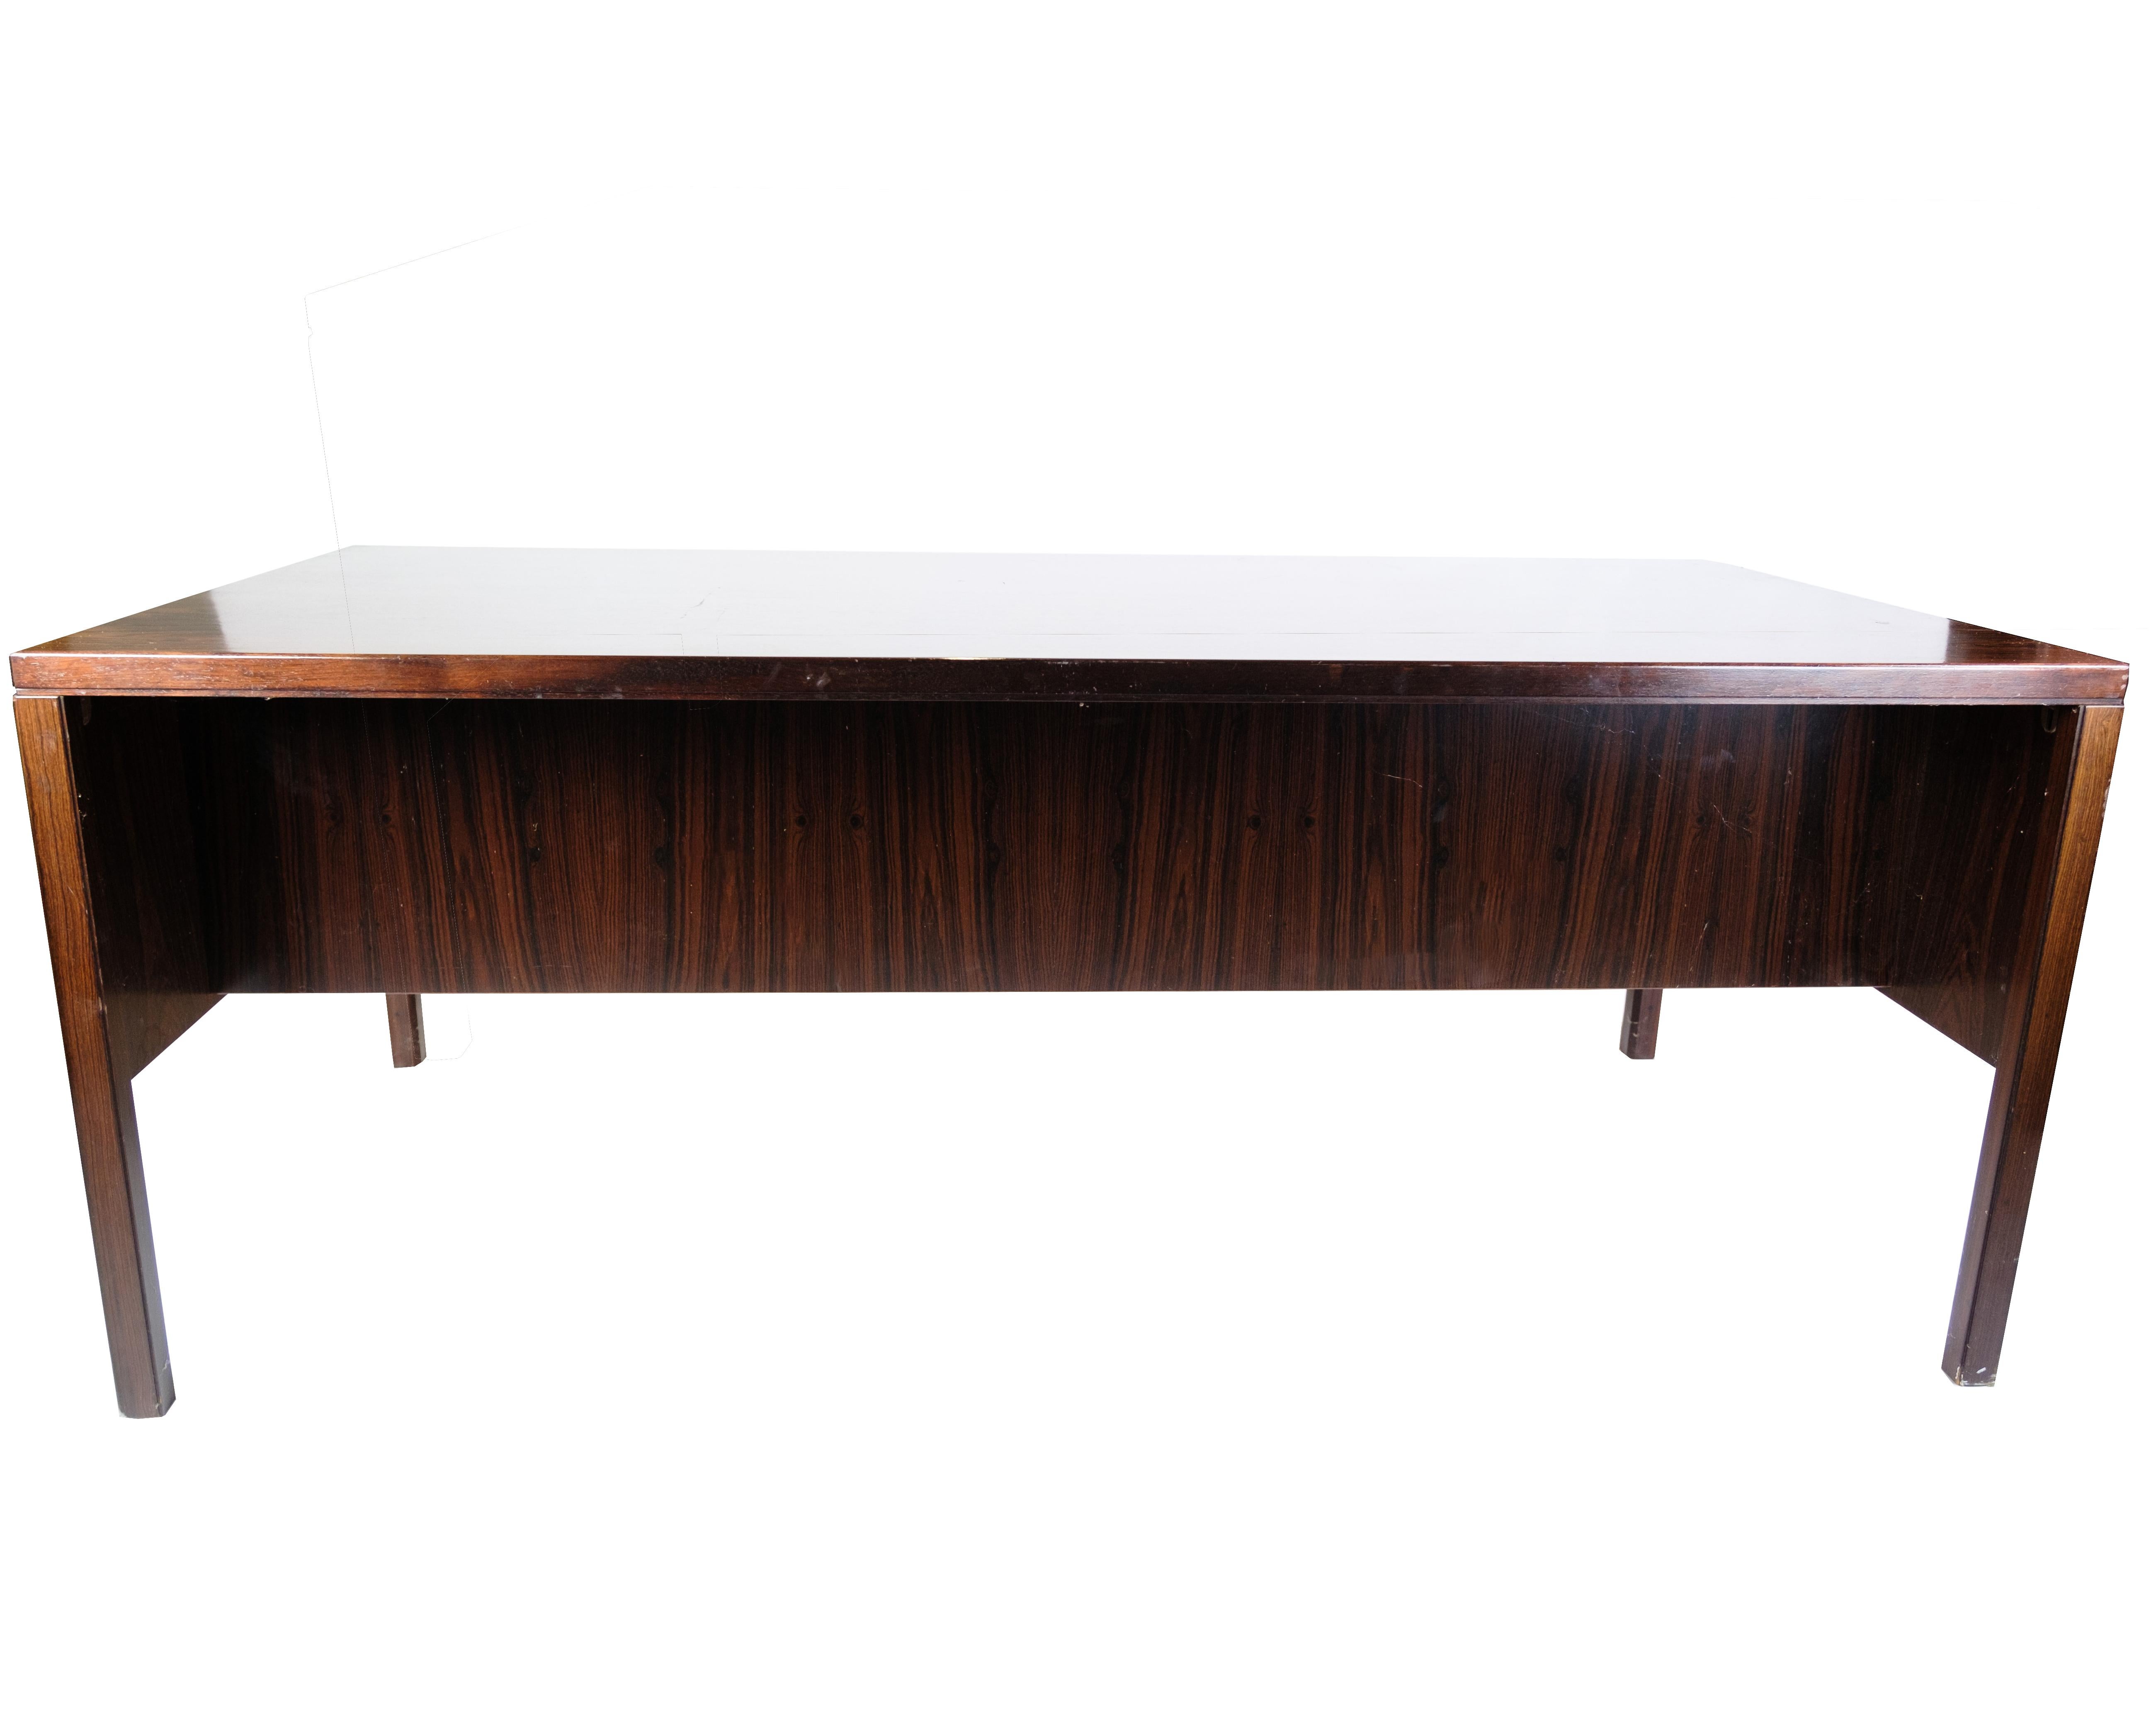 Desk Made In Rosewood By Omann Jun. Furniture Factory From 1960s For Sale 6